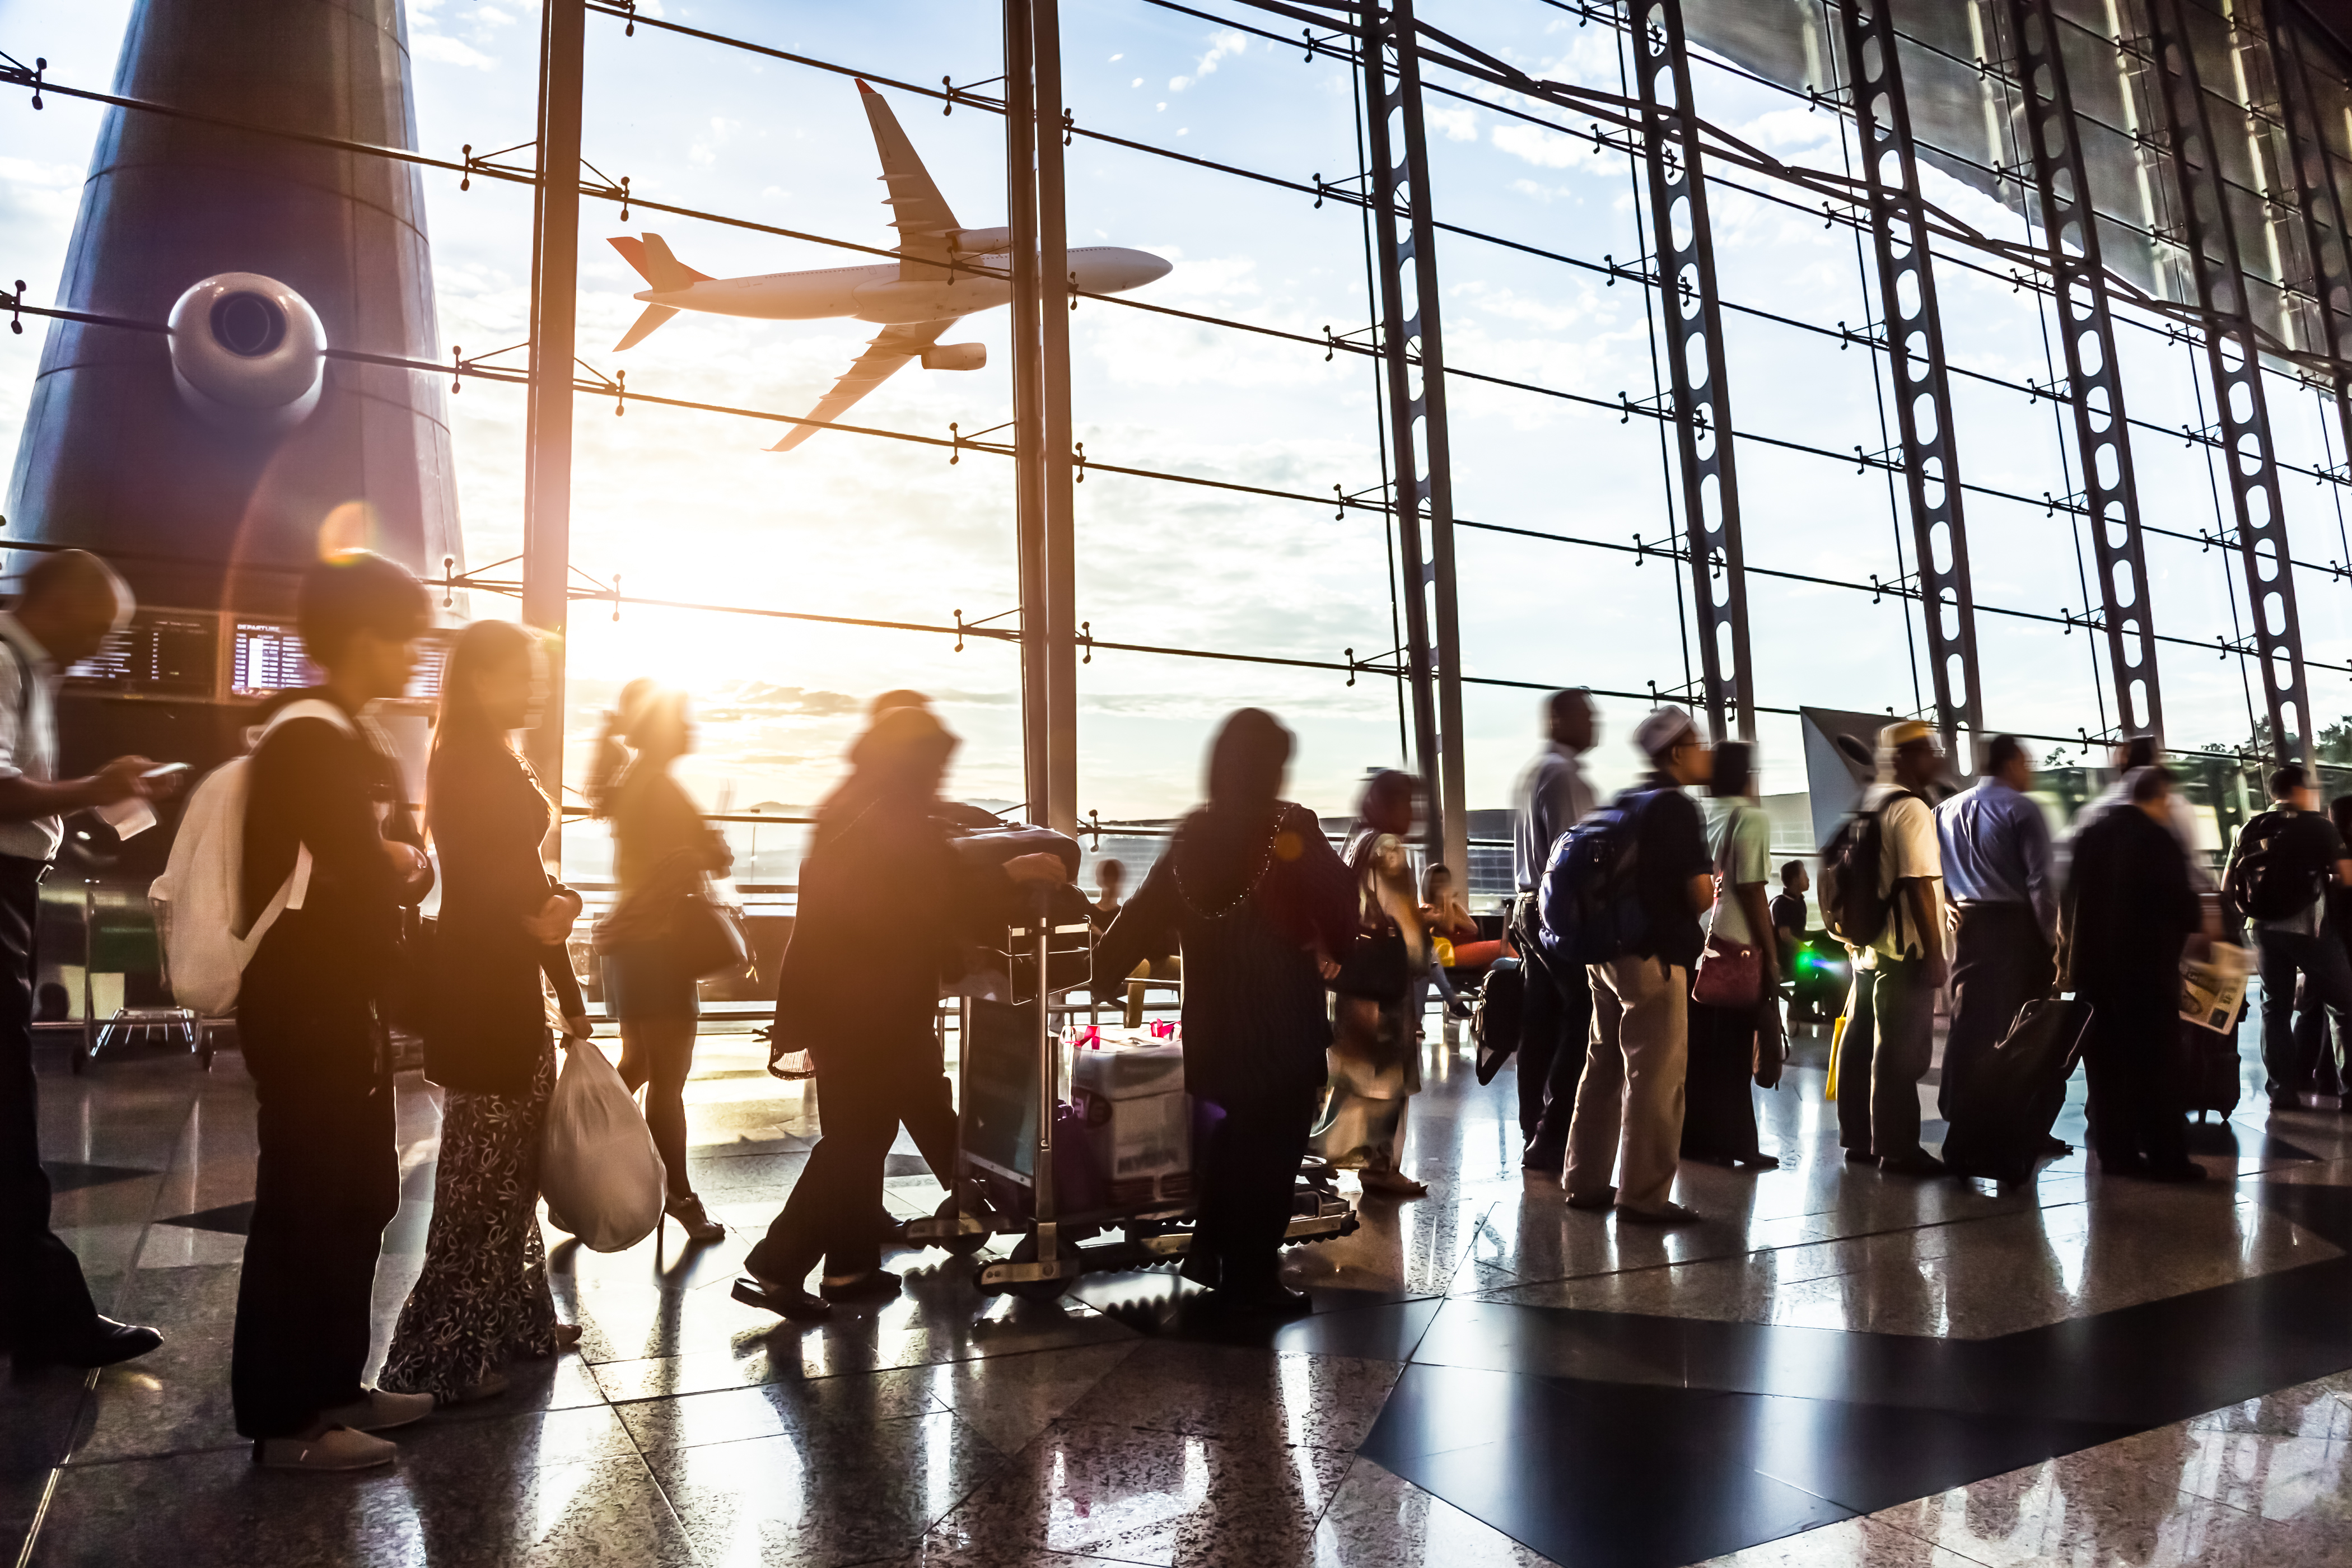 People at the airport | Source: Shutterstock